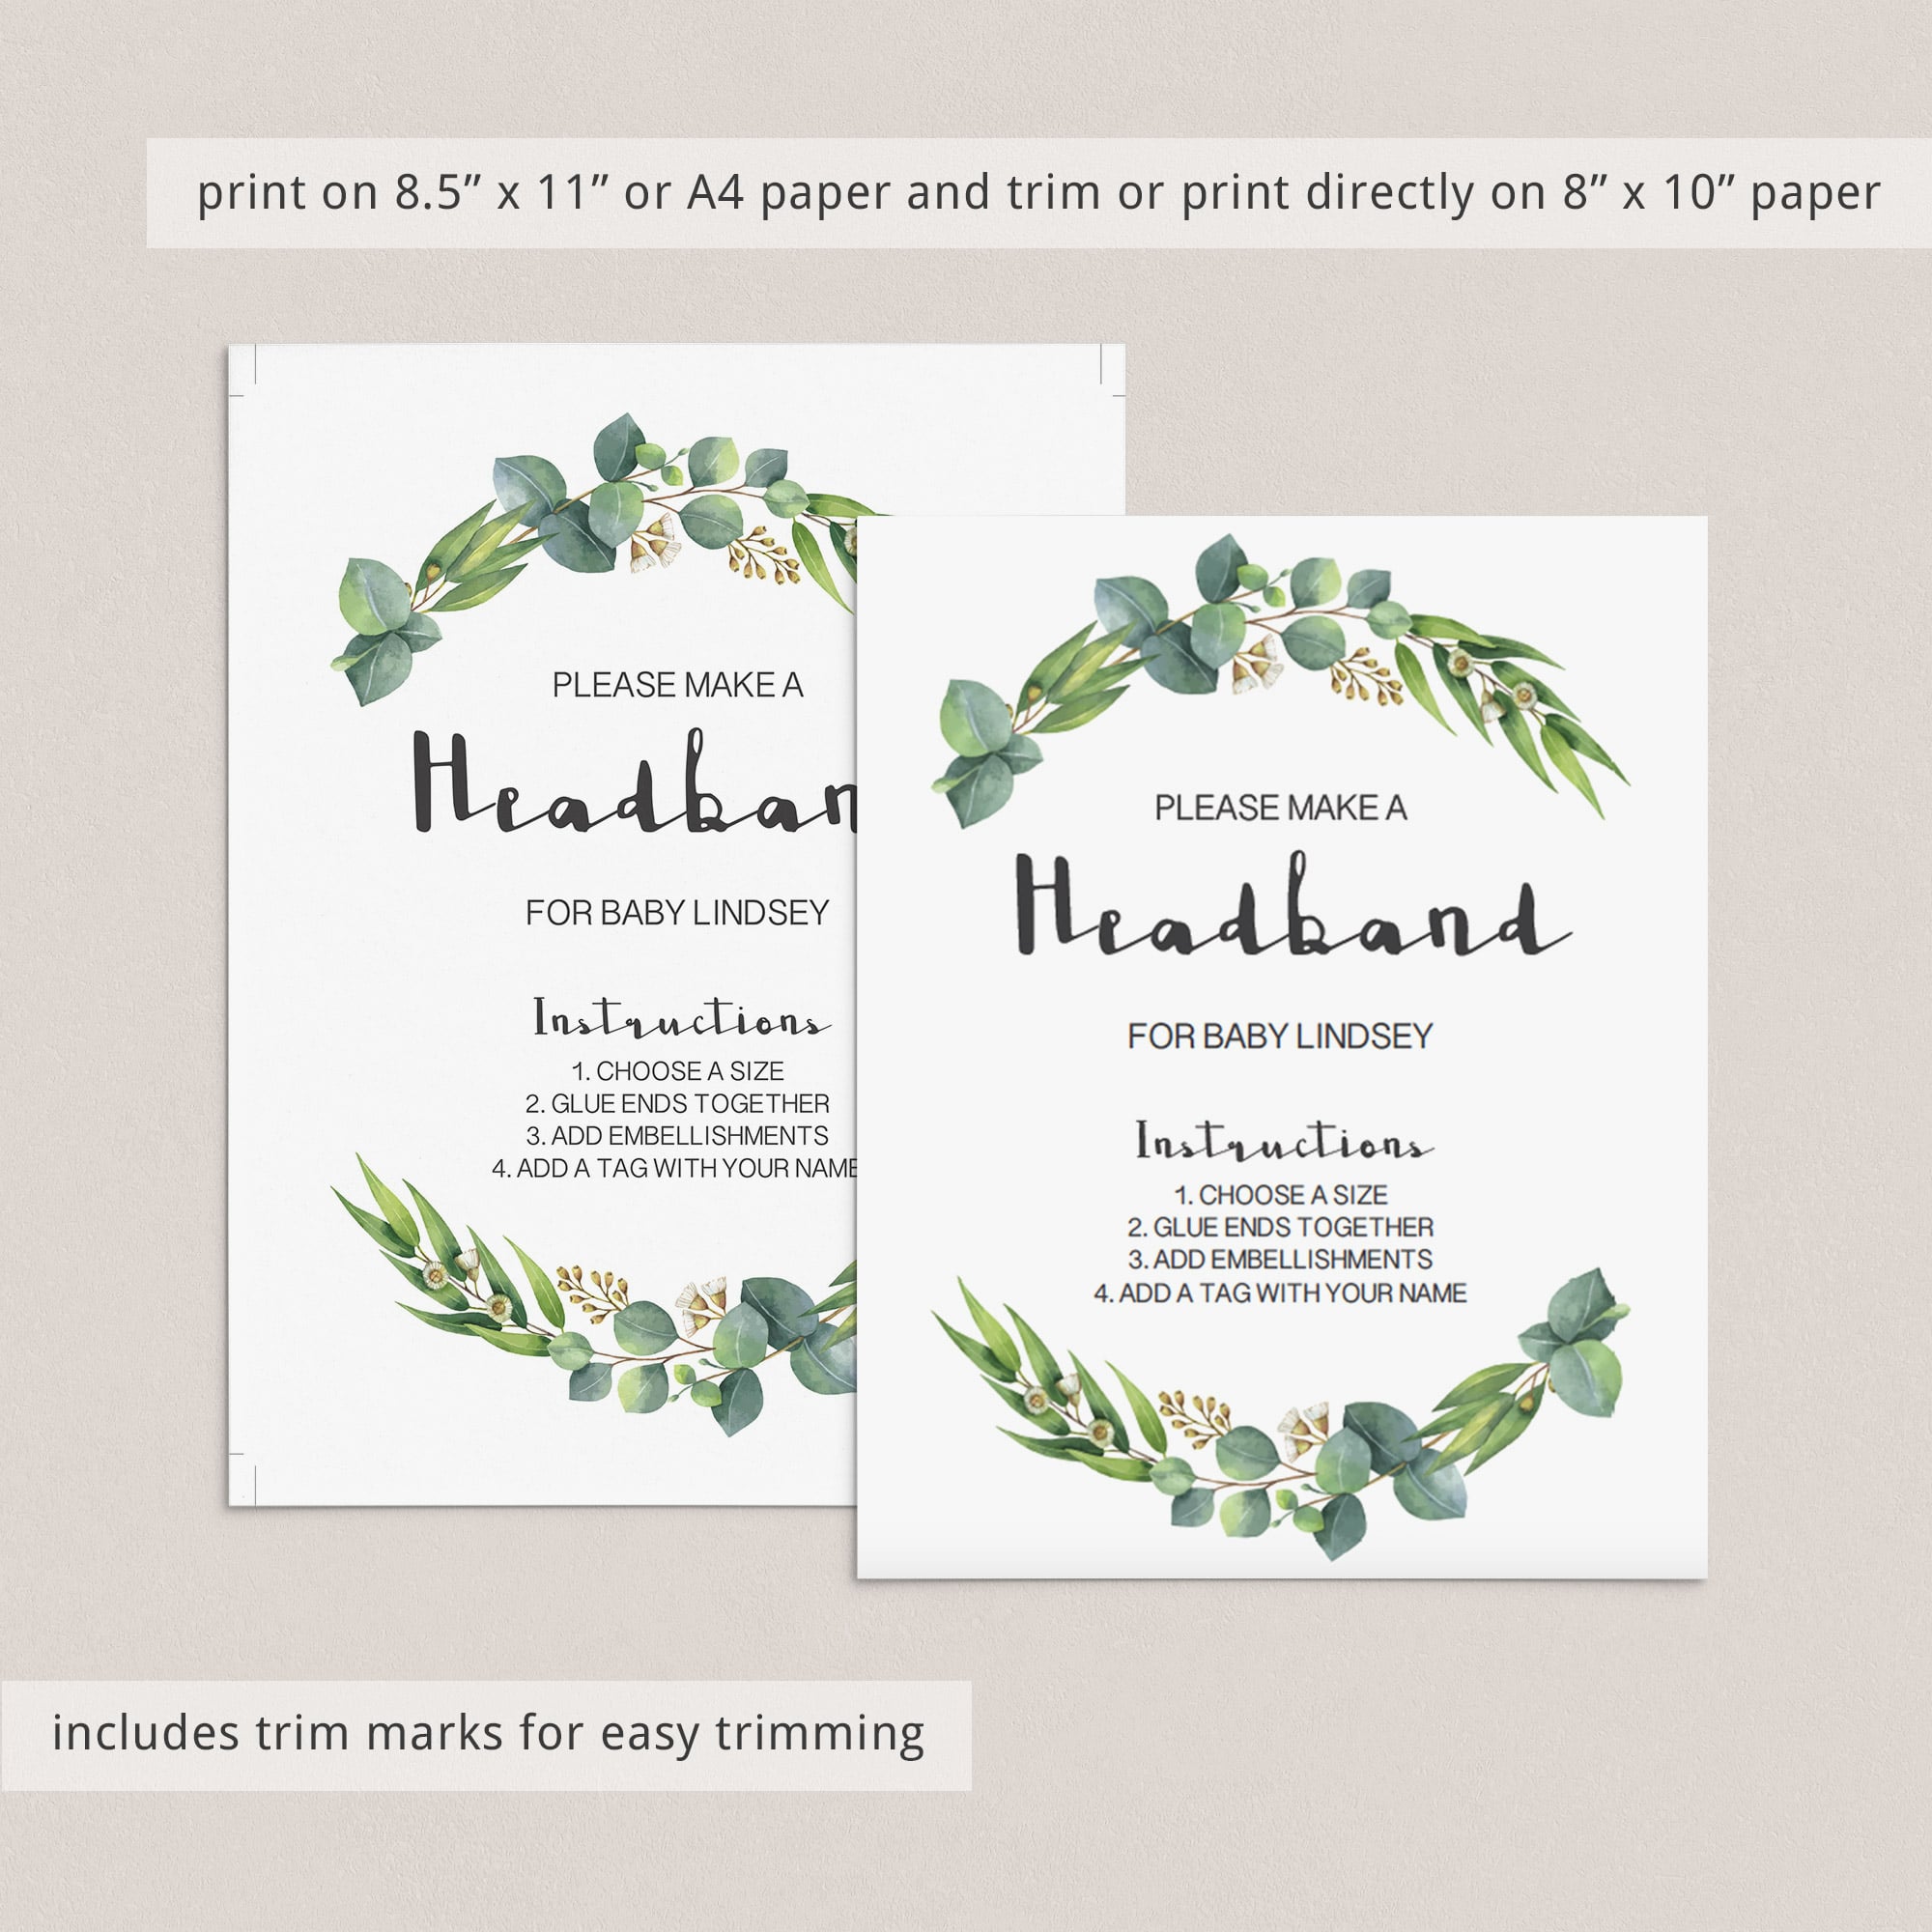 Headband station table sign printable greenery themed shower by LittleSizzle